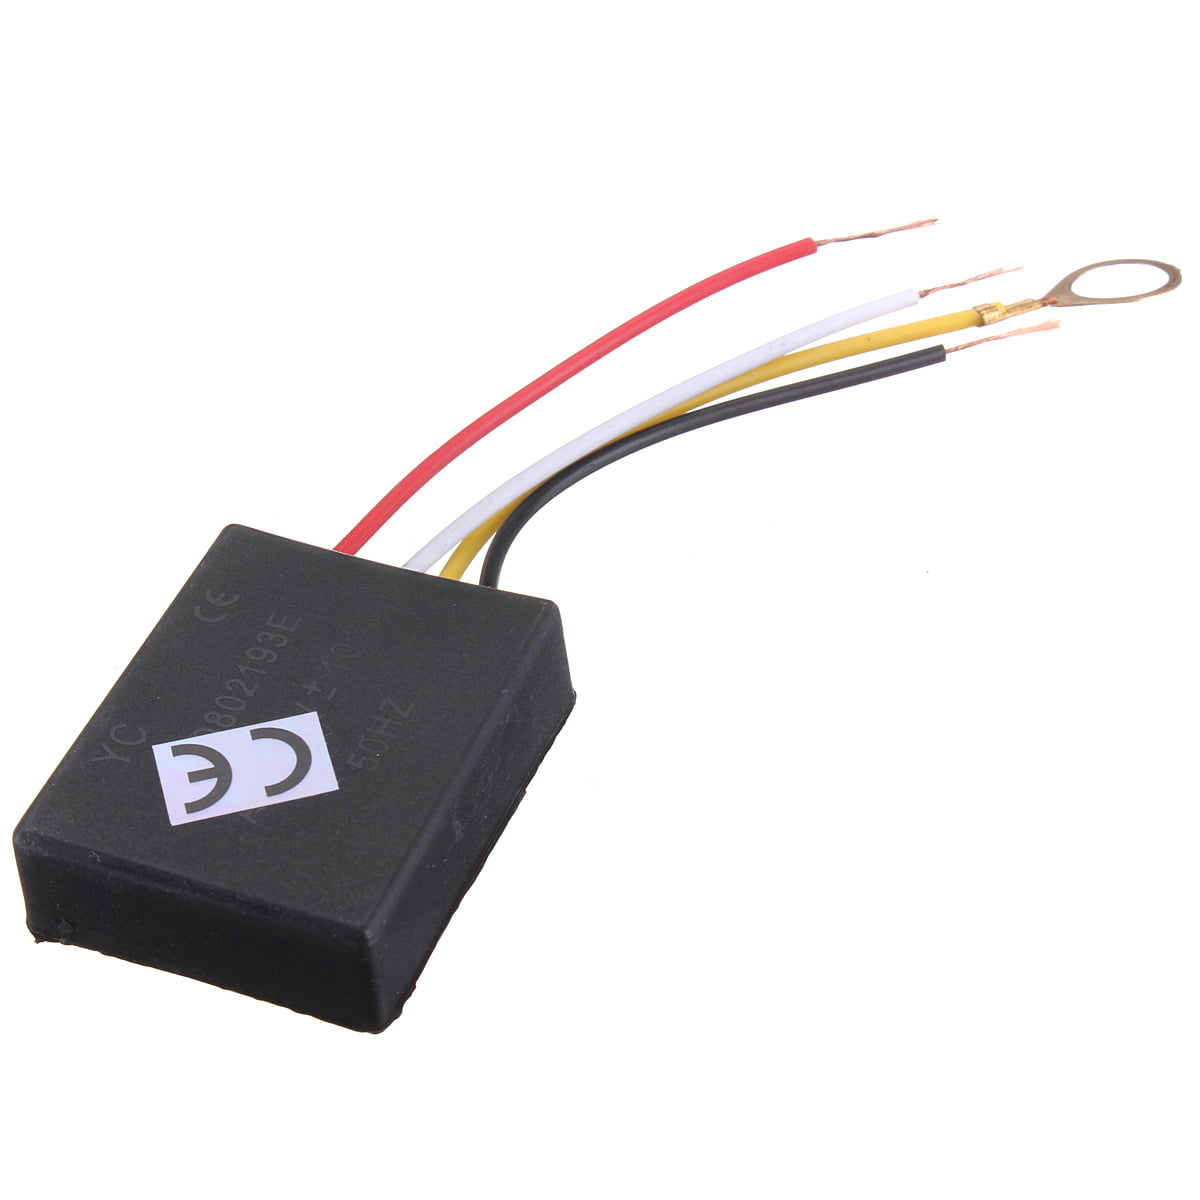 5pcs Capacitive LED Touch Control Sensor Switch Dimmer Lamp XD-614 Black